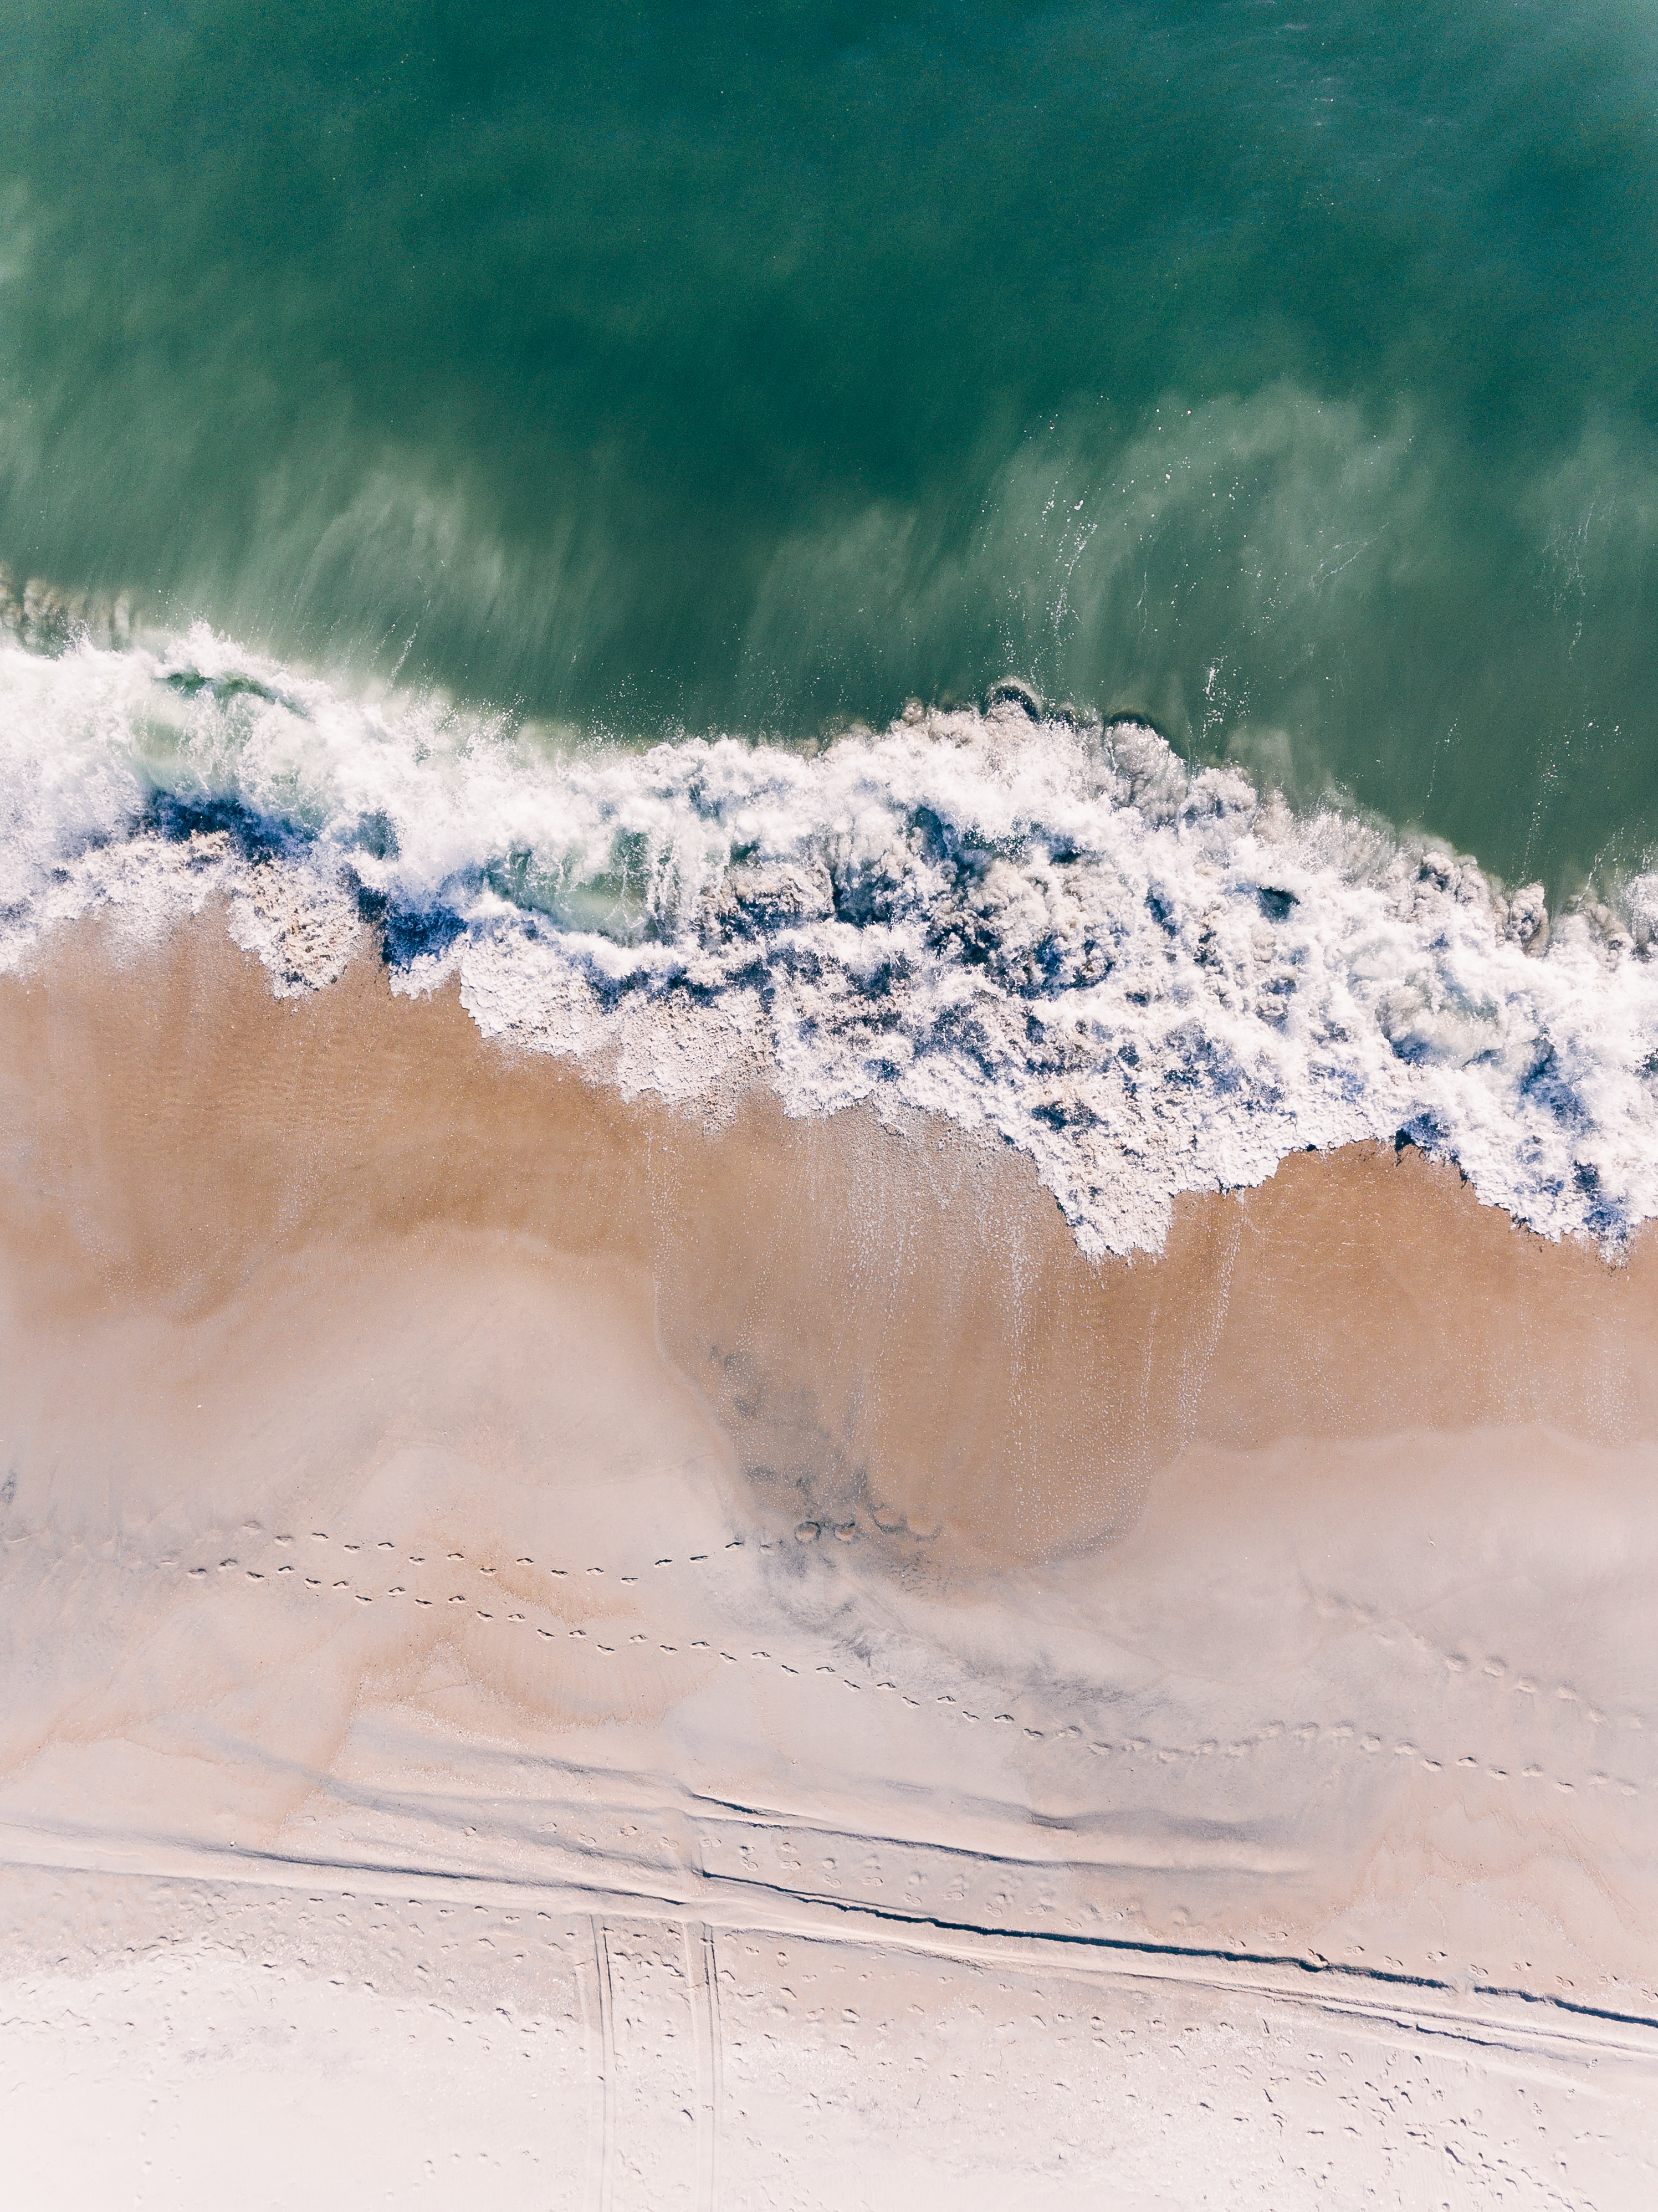 vertical wallpaper nature, surf, sand, view from above, ocean, wave